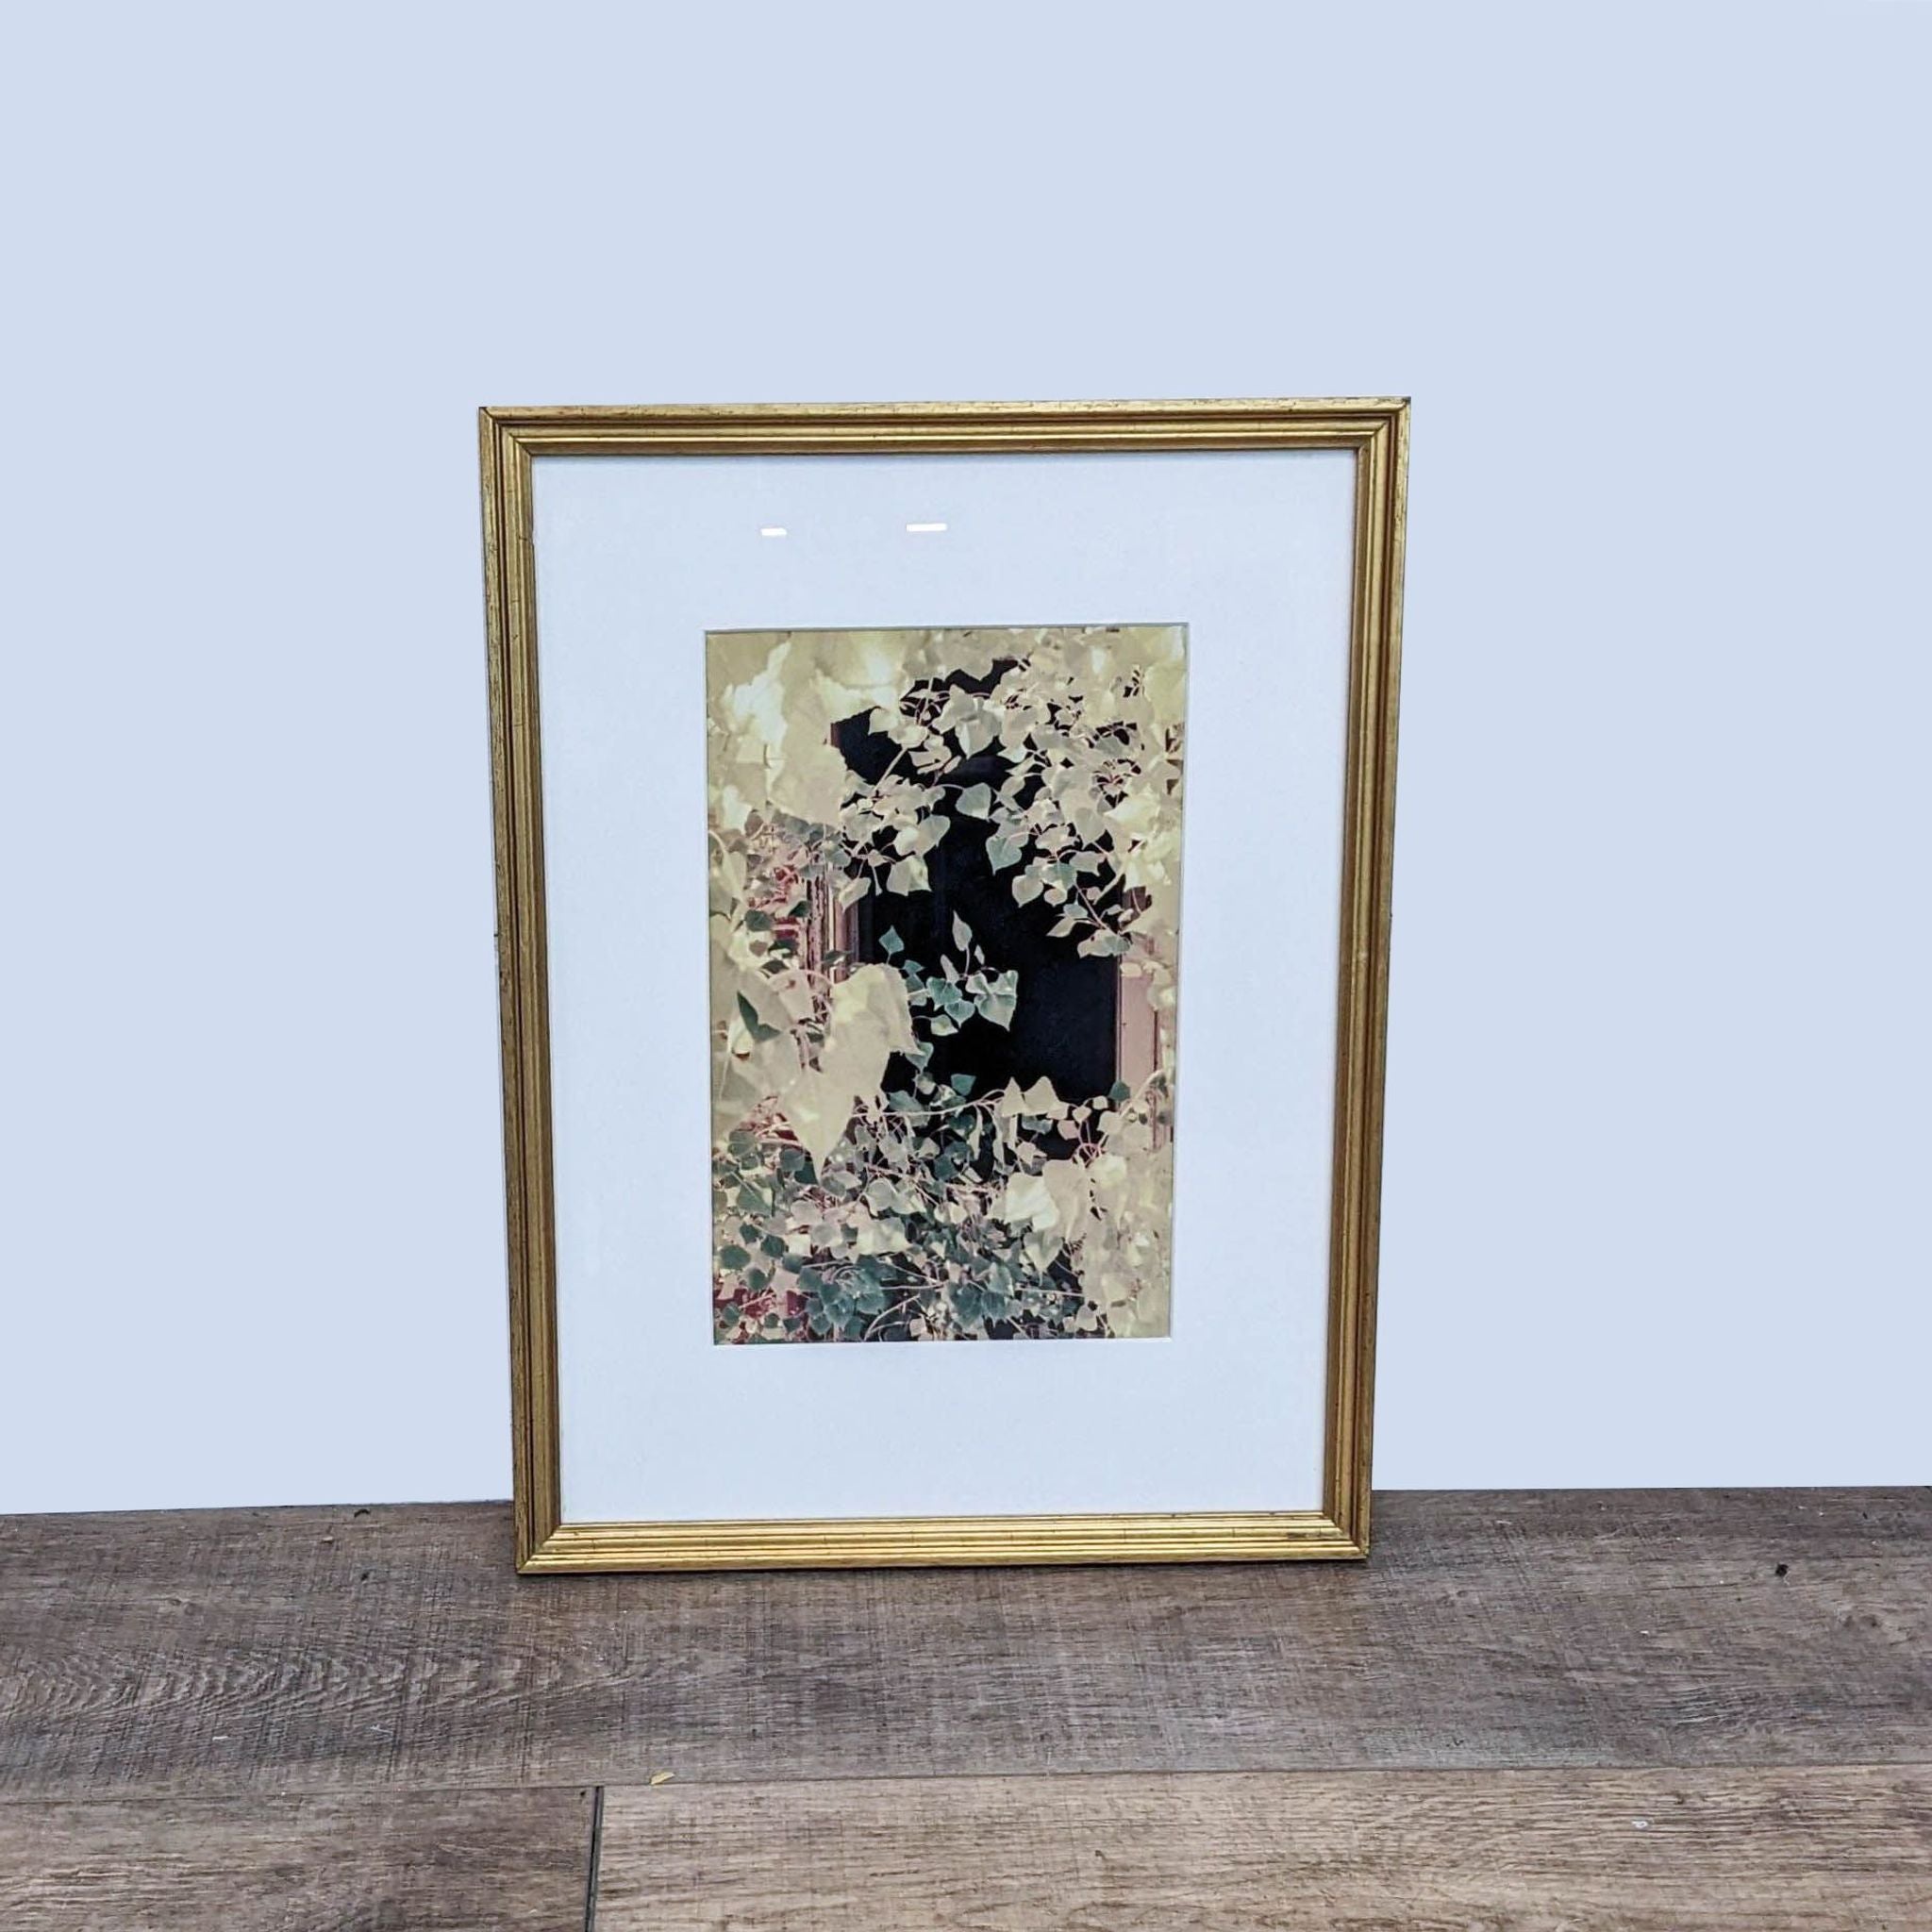 Reperch framed art print featuring tree branches before an open window, in a gold frame on a wooden floor.